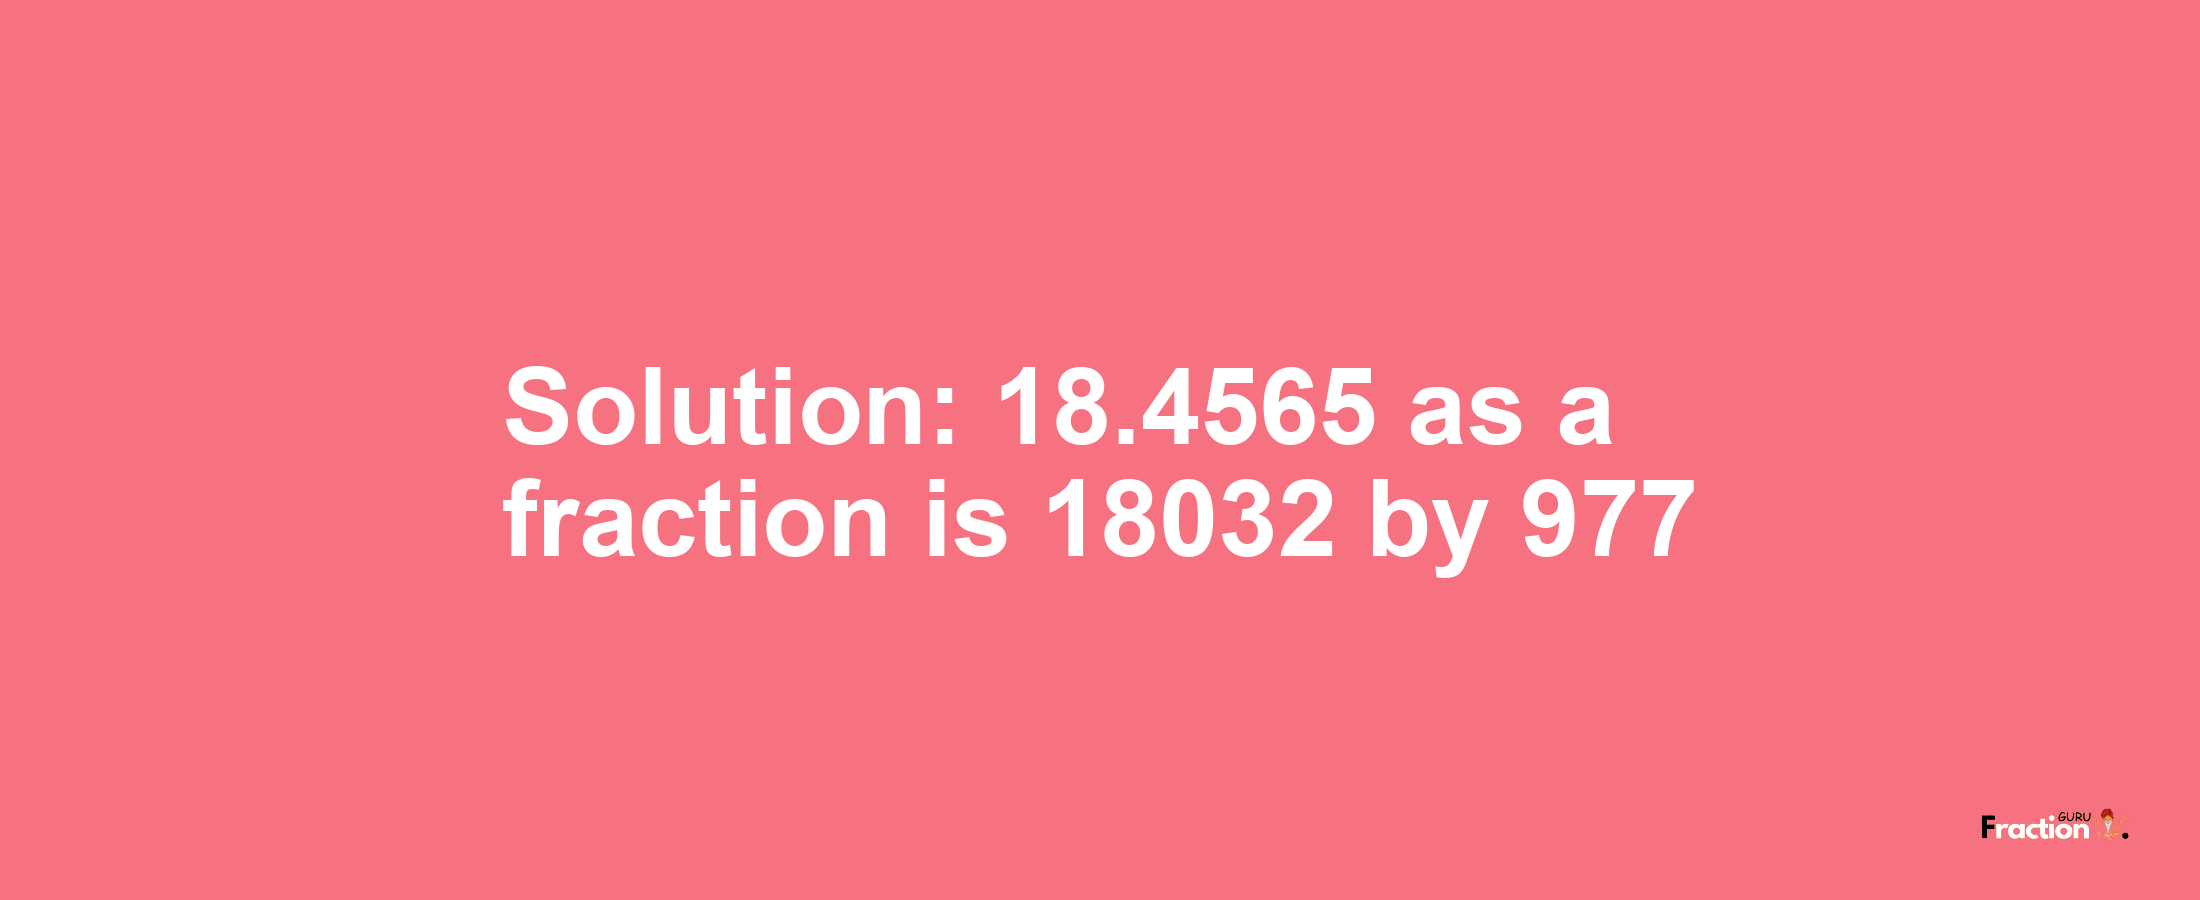 Solution:18.4565 as a fraction is 18032/977